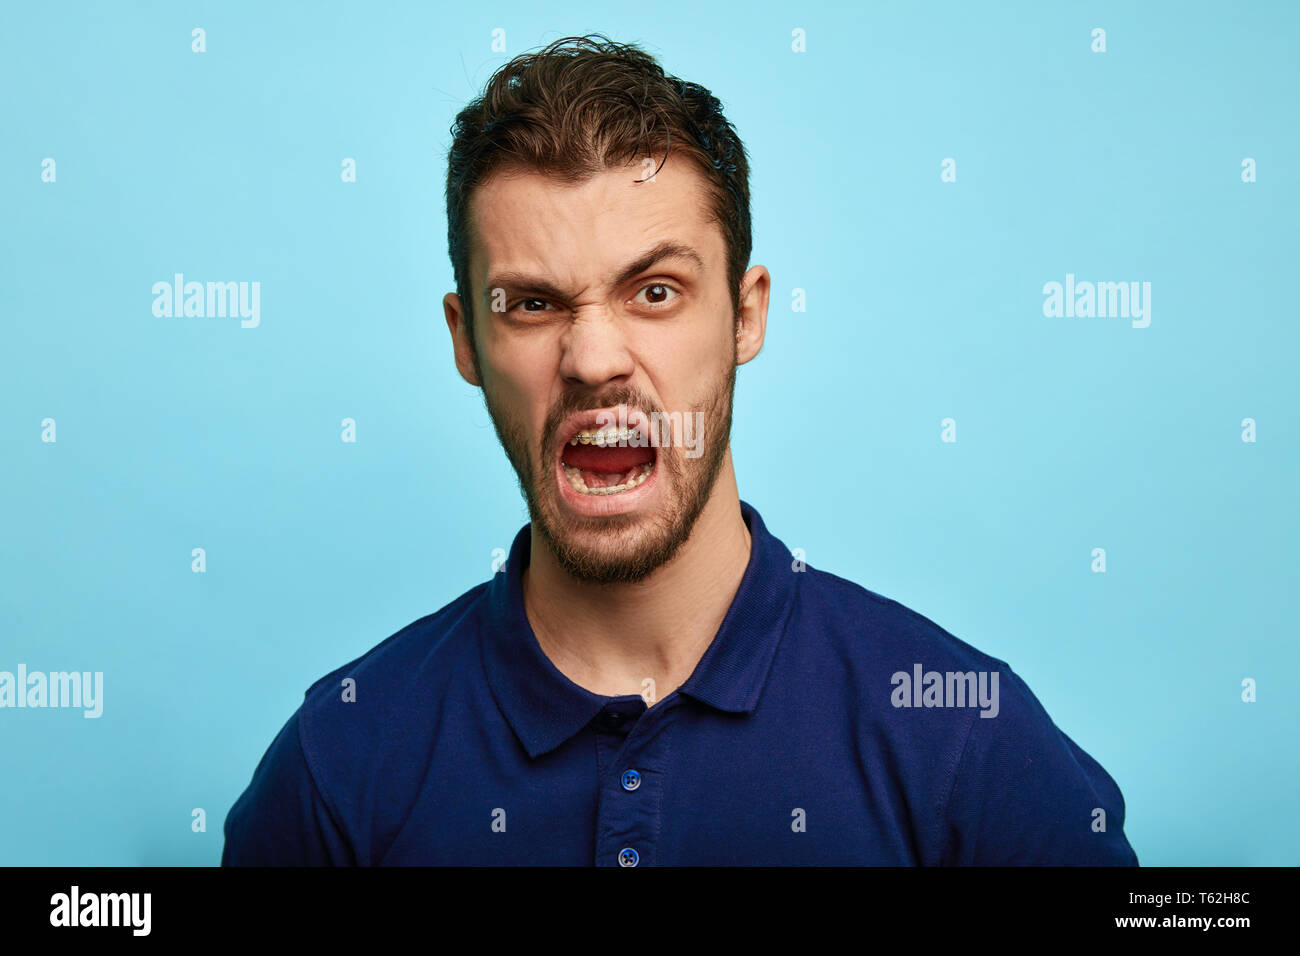 frustrated, enraged man with grumpy grimace on his face, scolding somebody, expresses negative emotion, irritation concept. Stock Photo